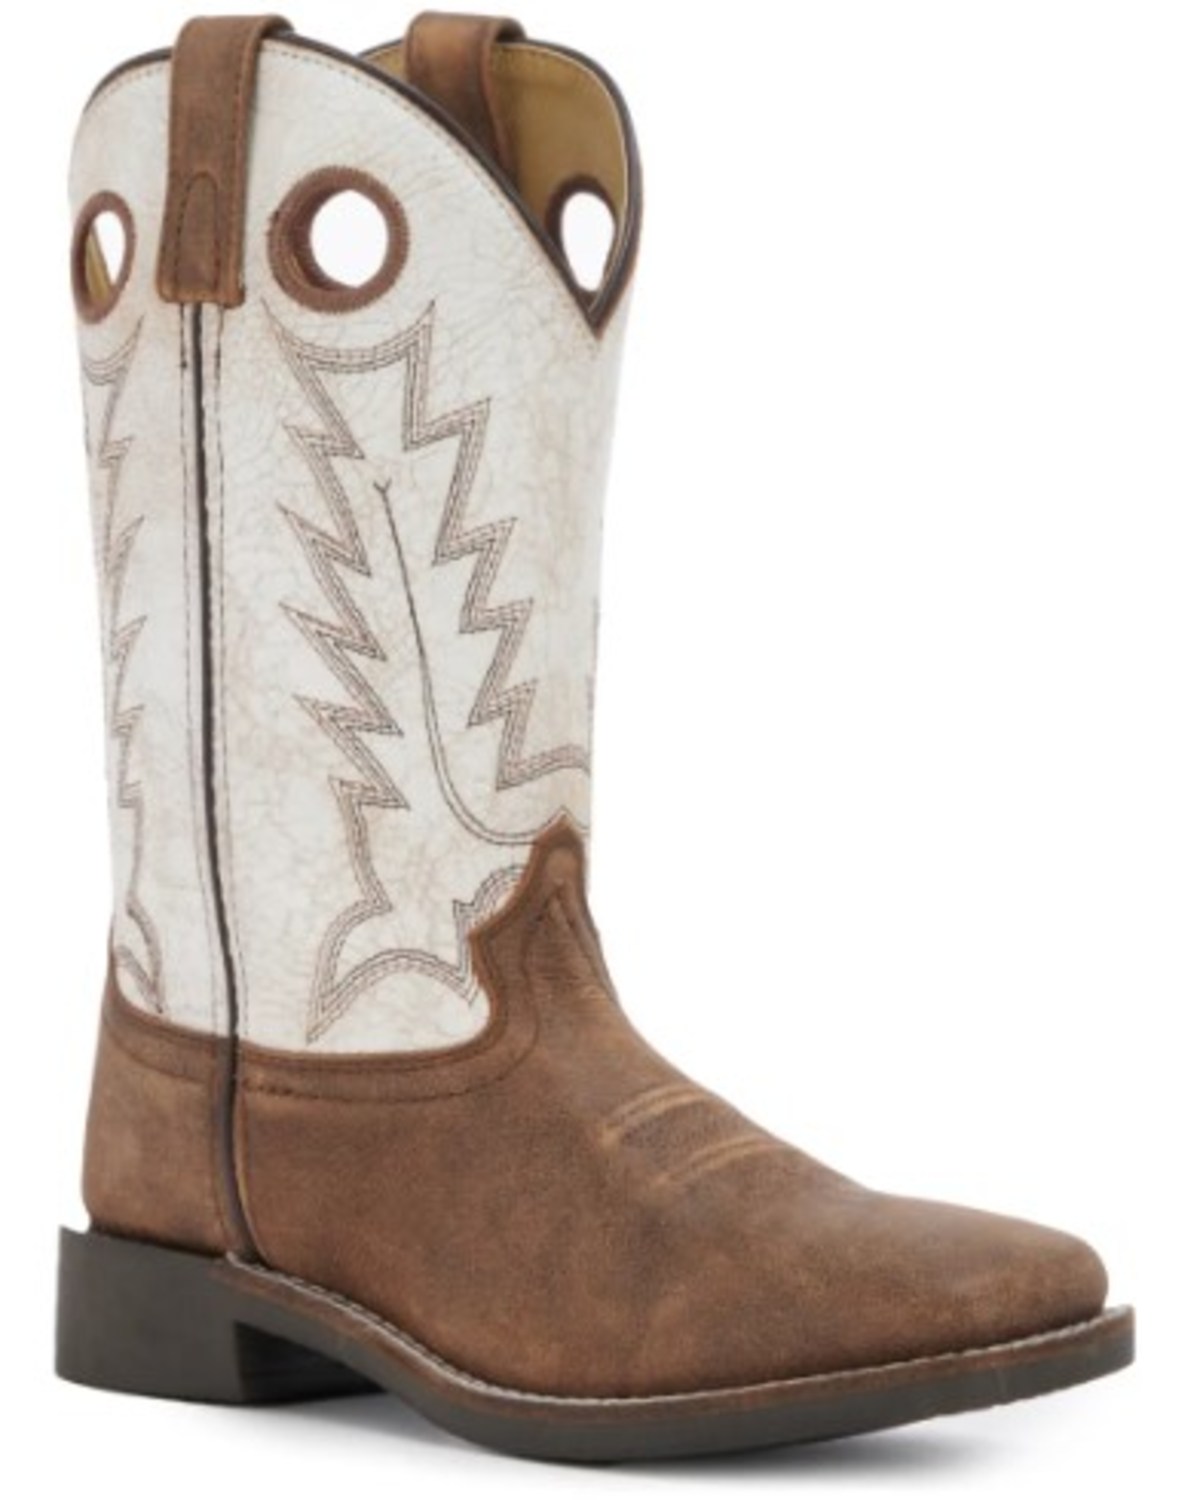 Smoky Mountain Women's Drifter Western Performance Boots - Broad Square Toe